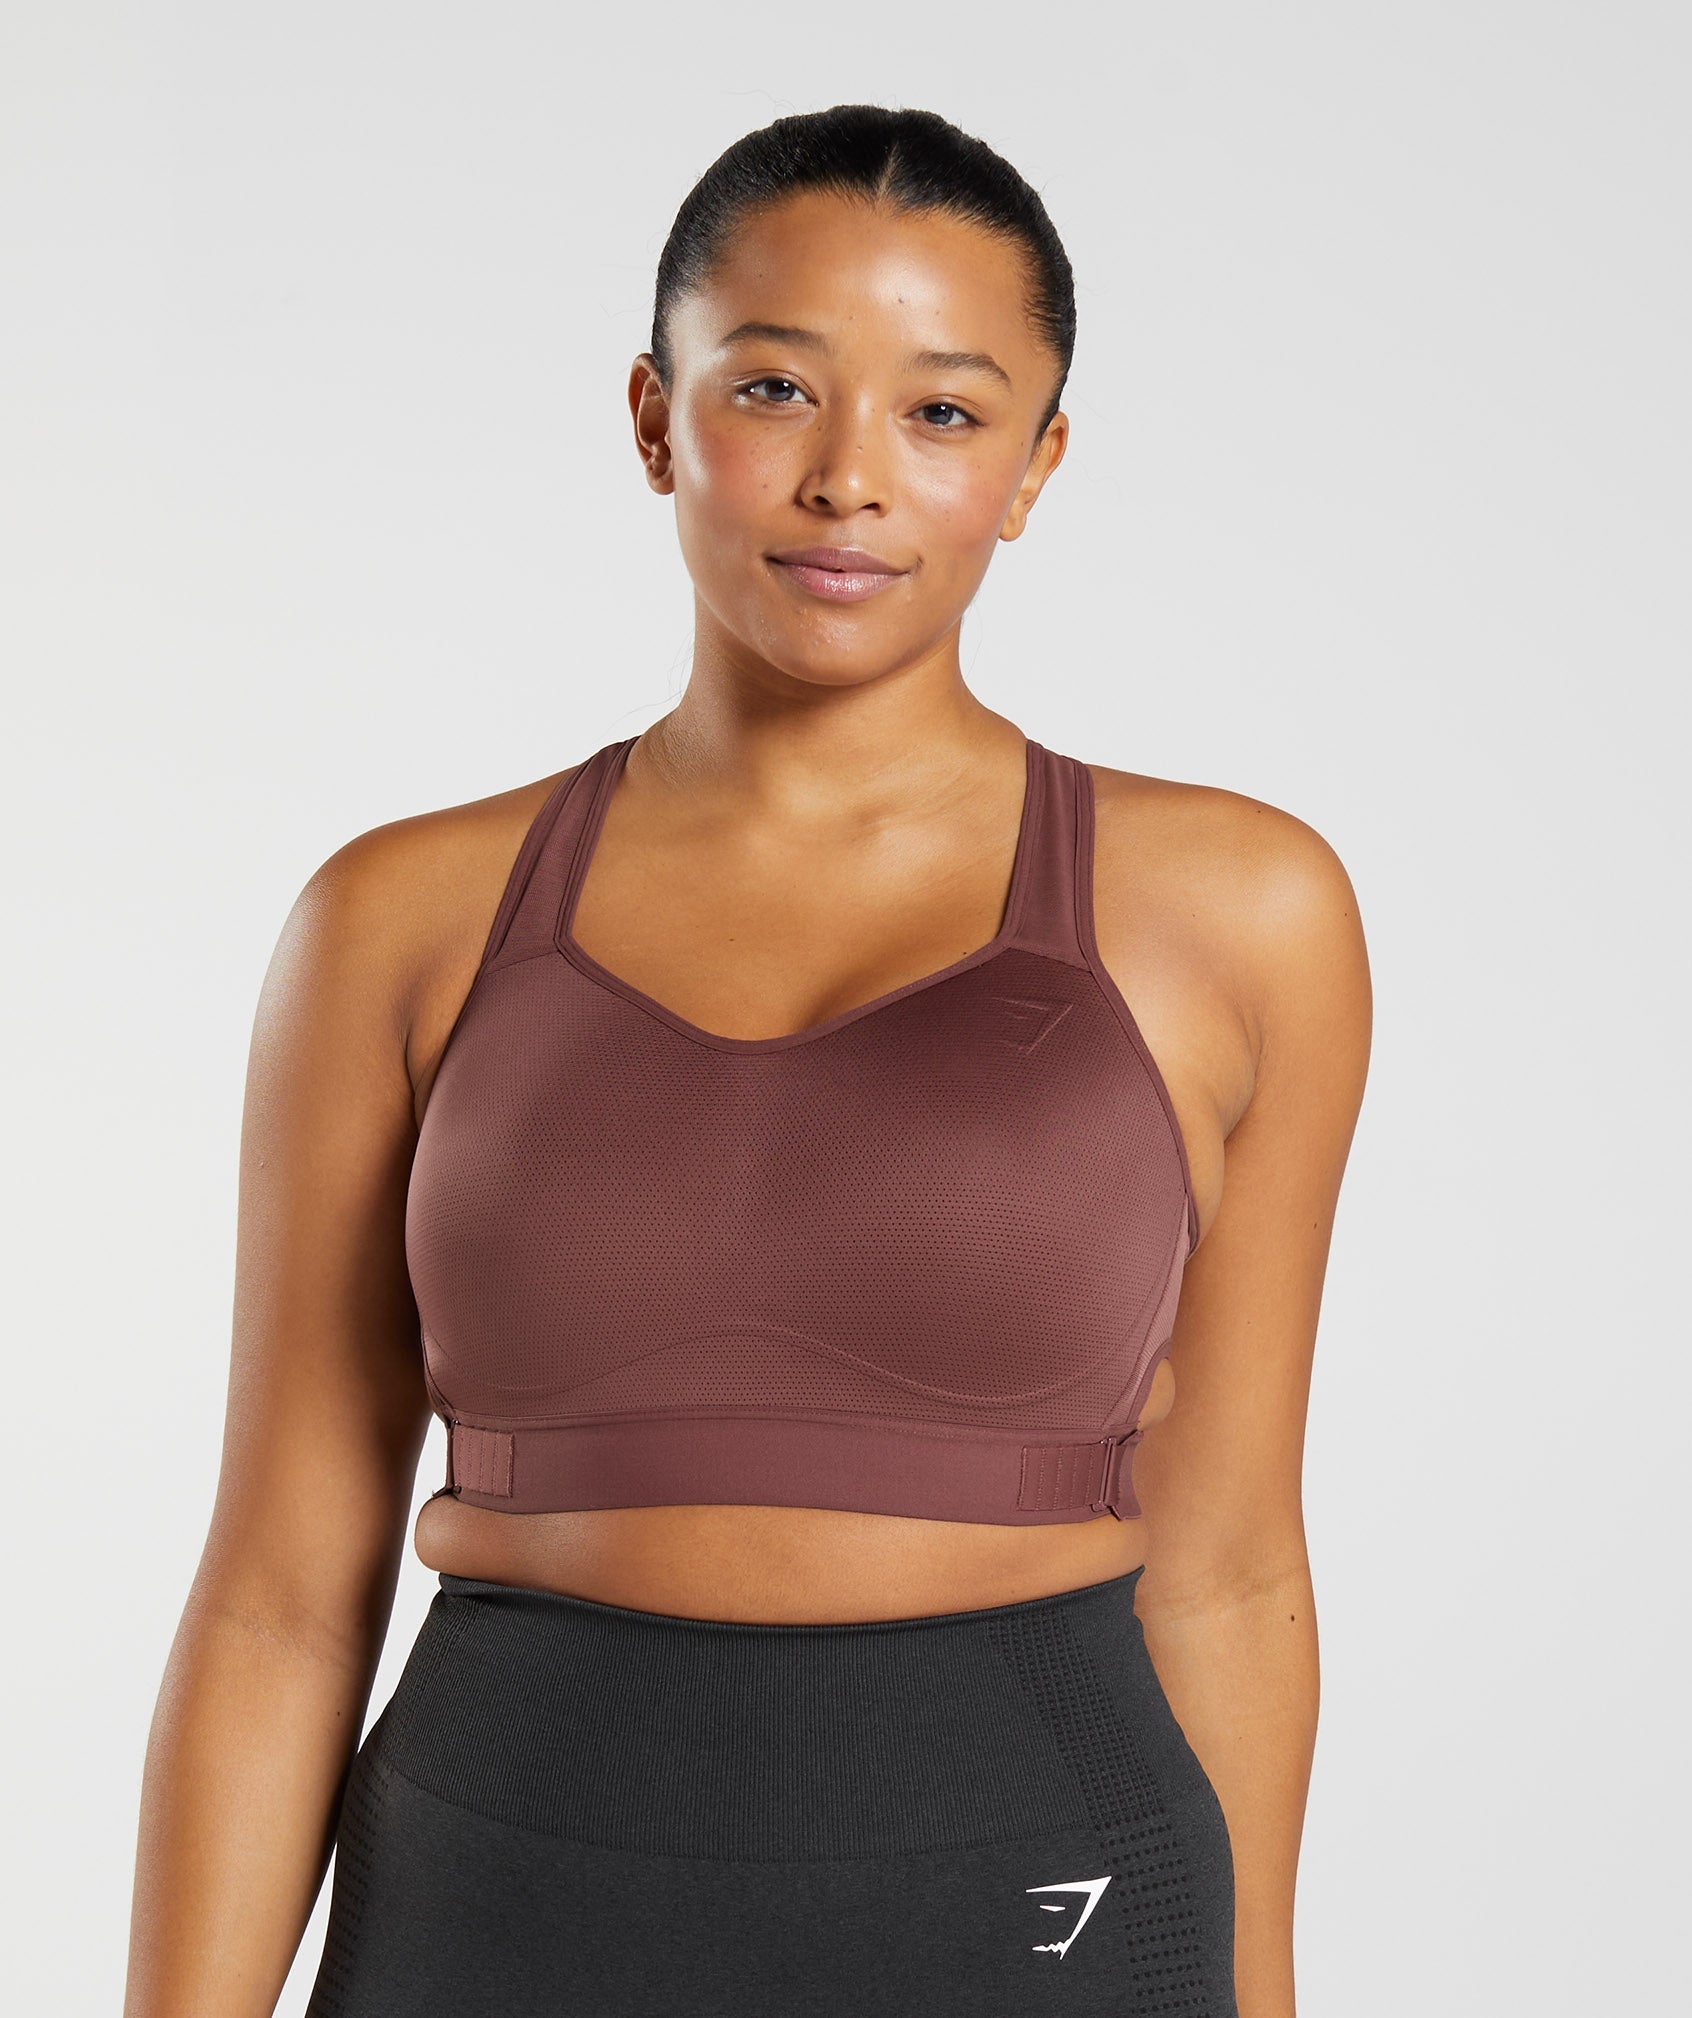 Racerback High Support Sports Bra in Cherry Brown - view 6